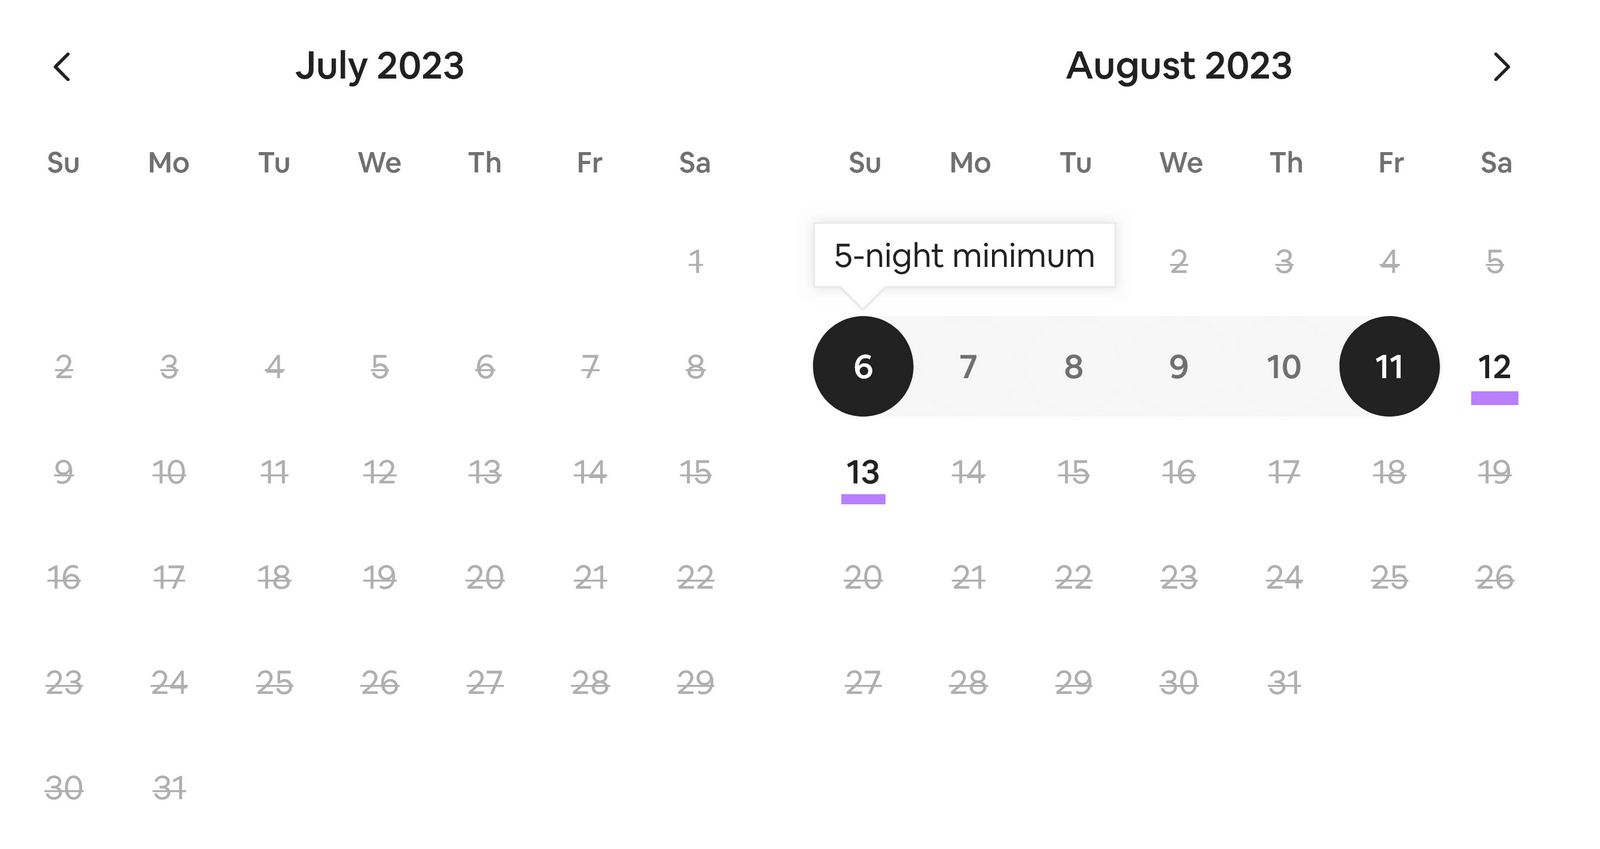 an example of Airbnb calendar showing "5-night minimum" stay option